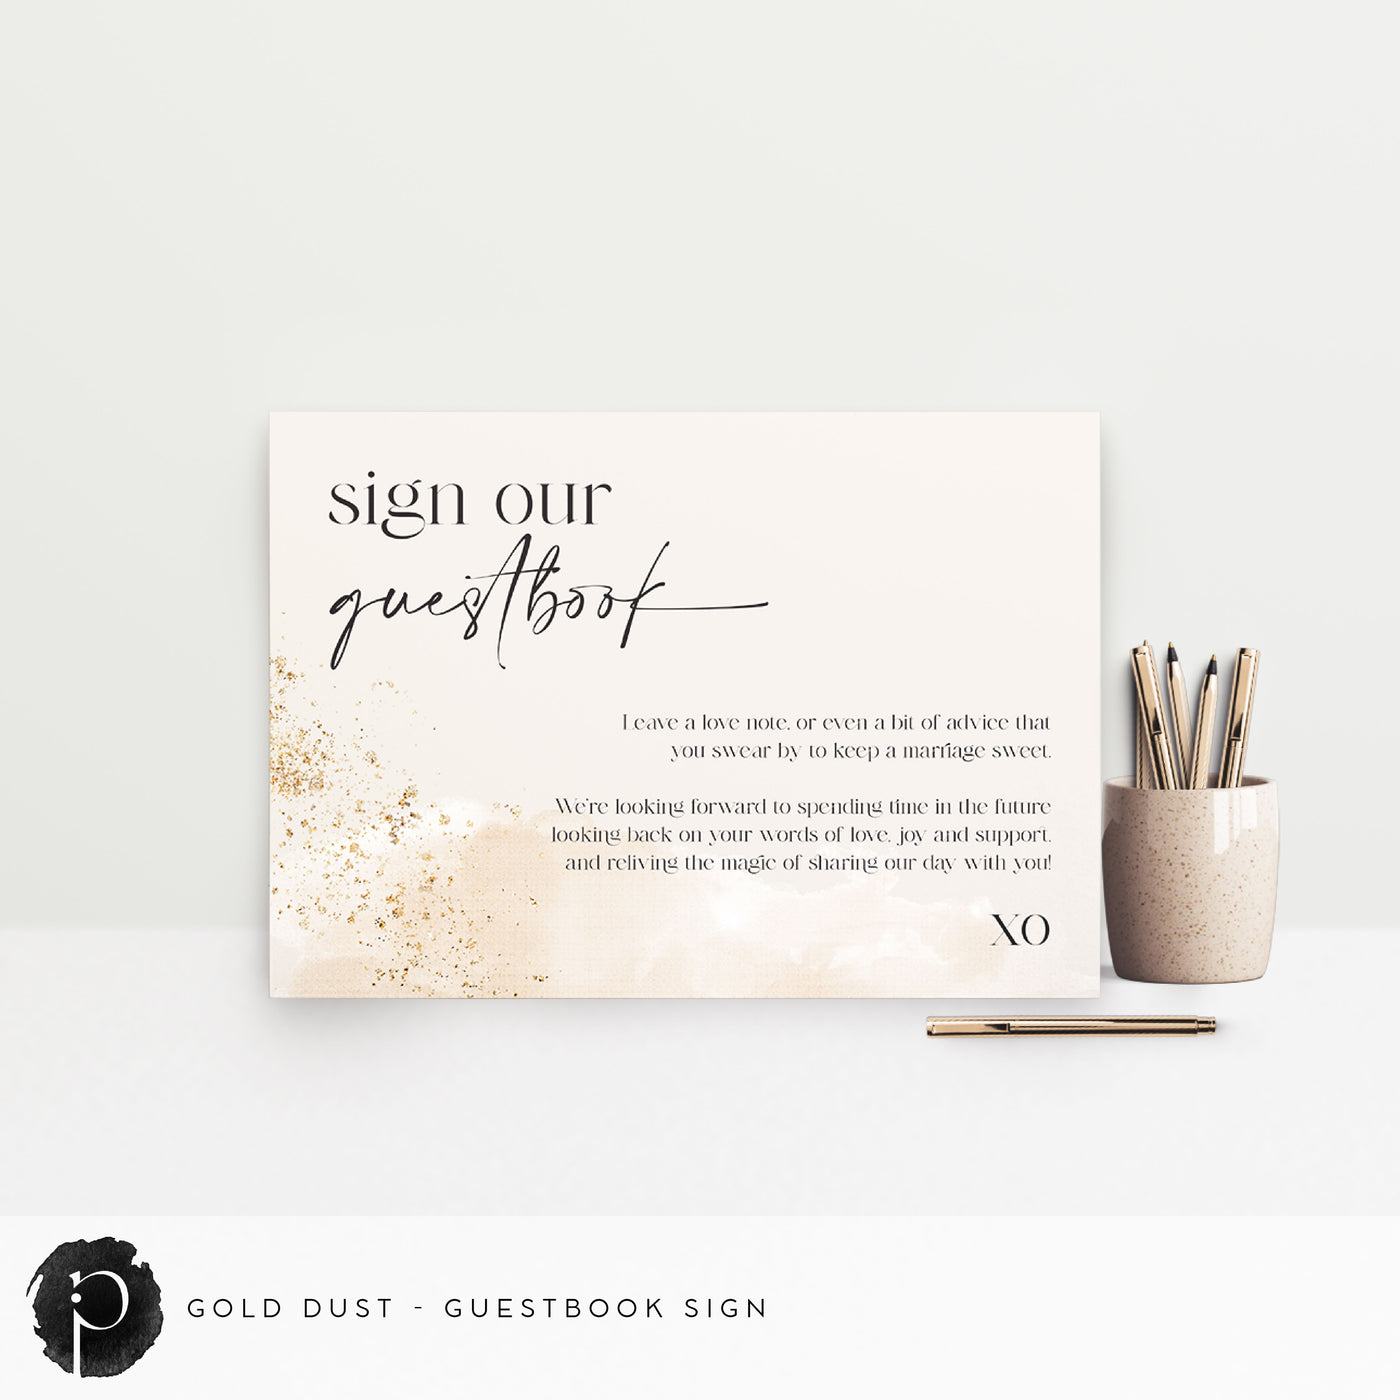 Gold Dust - Guestbook Sign